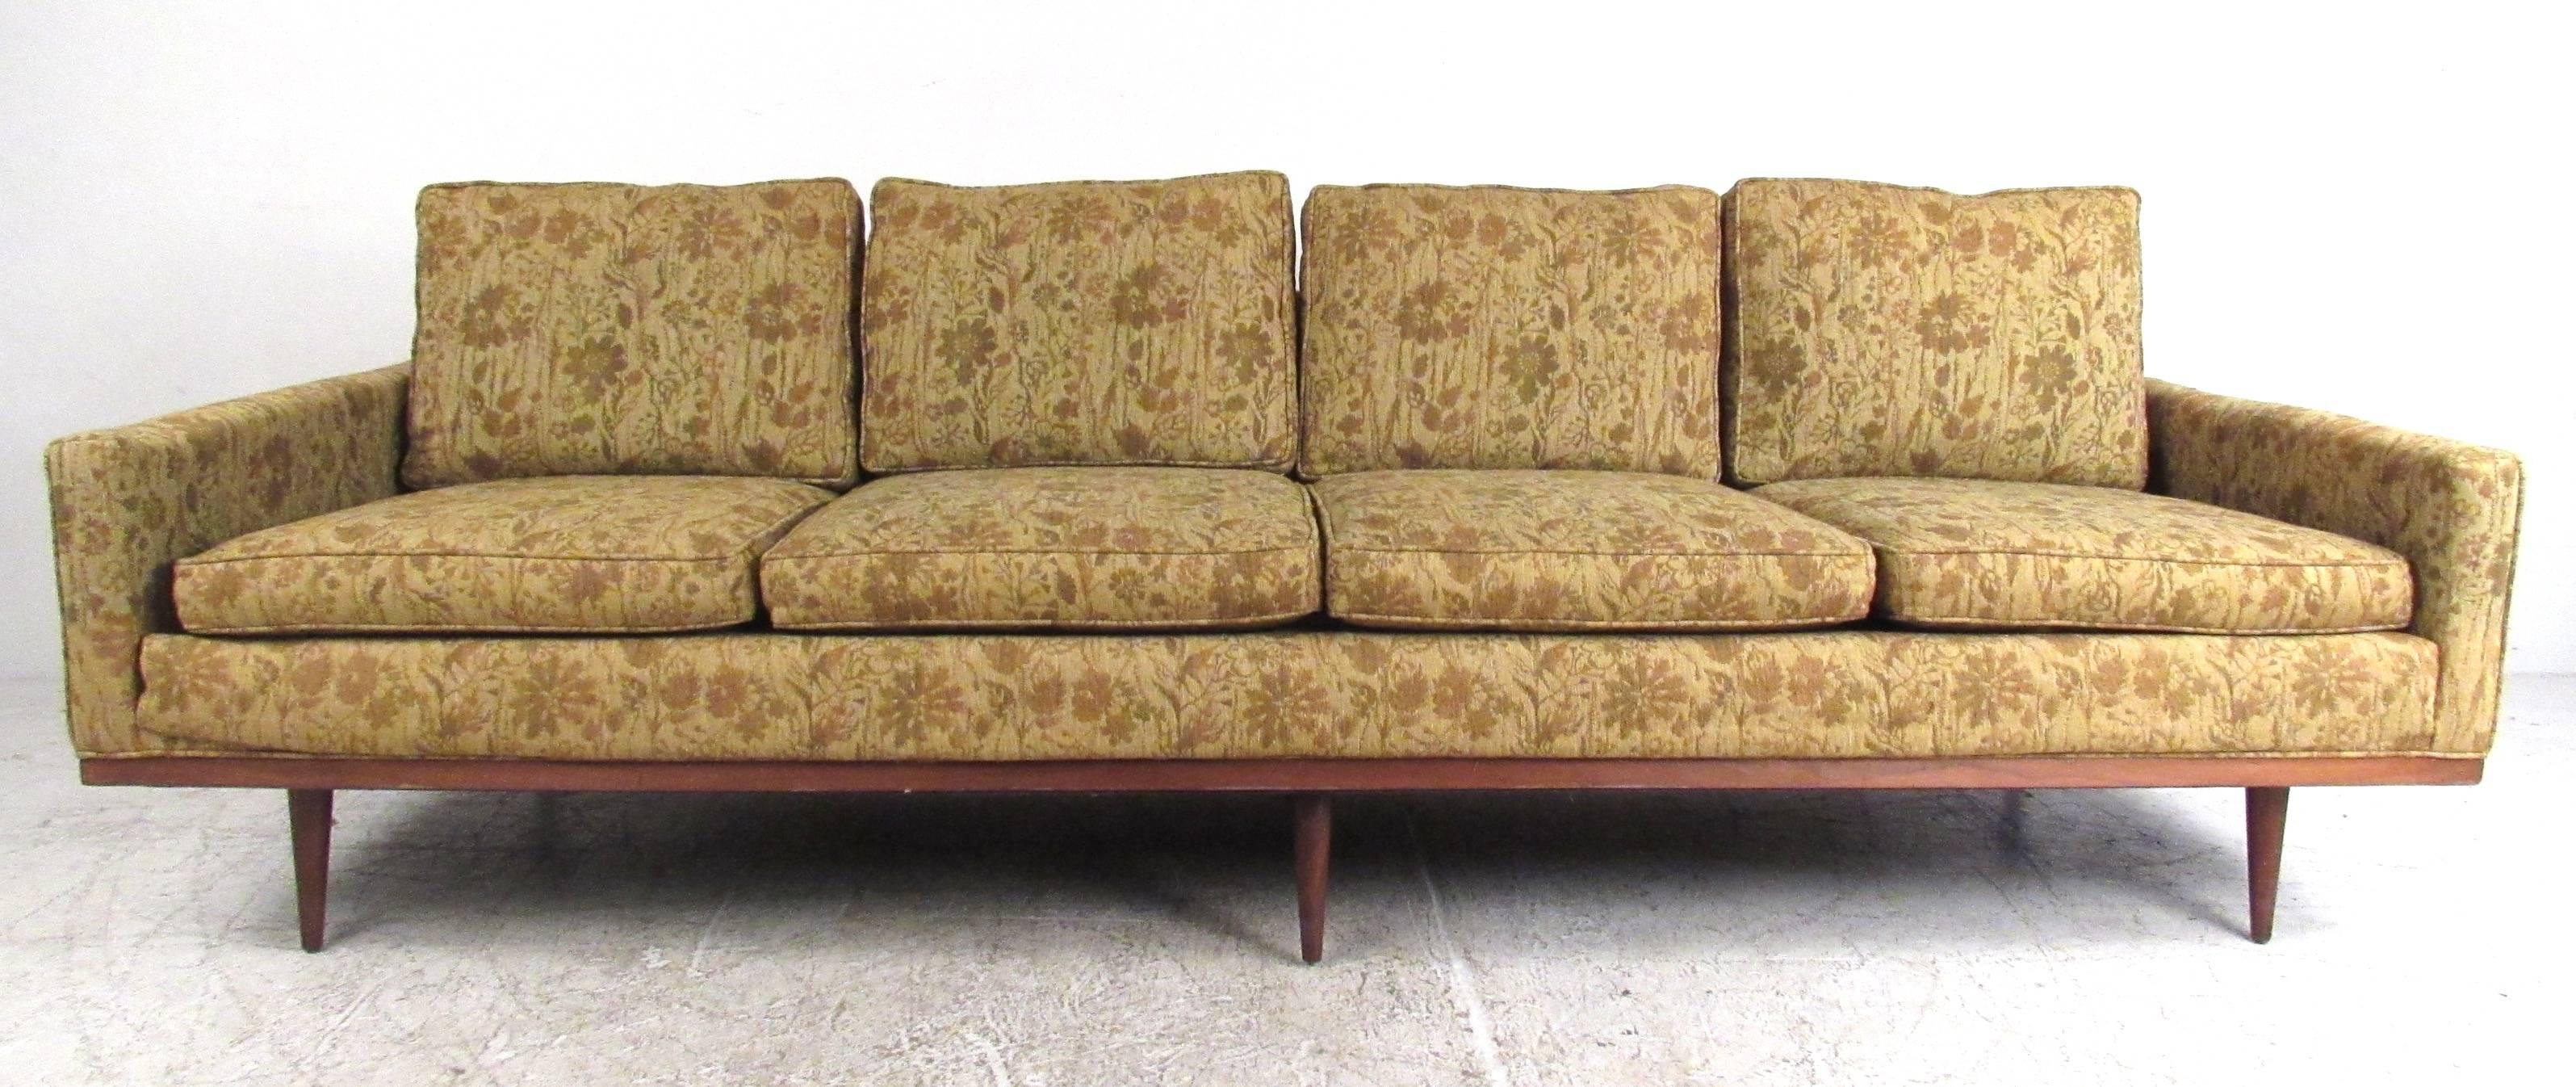 This exquisite vintage sofa features a stunning four seat design with six legs for added support. Wood trim, tapered post legs and classic Milo Baughman style add to the Mid-Century appeal of this long sofa. Please confirm item location (NY or NJ).